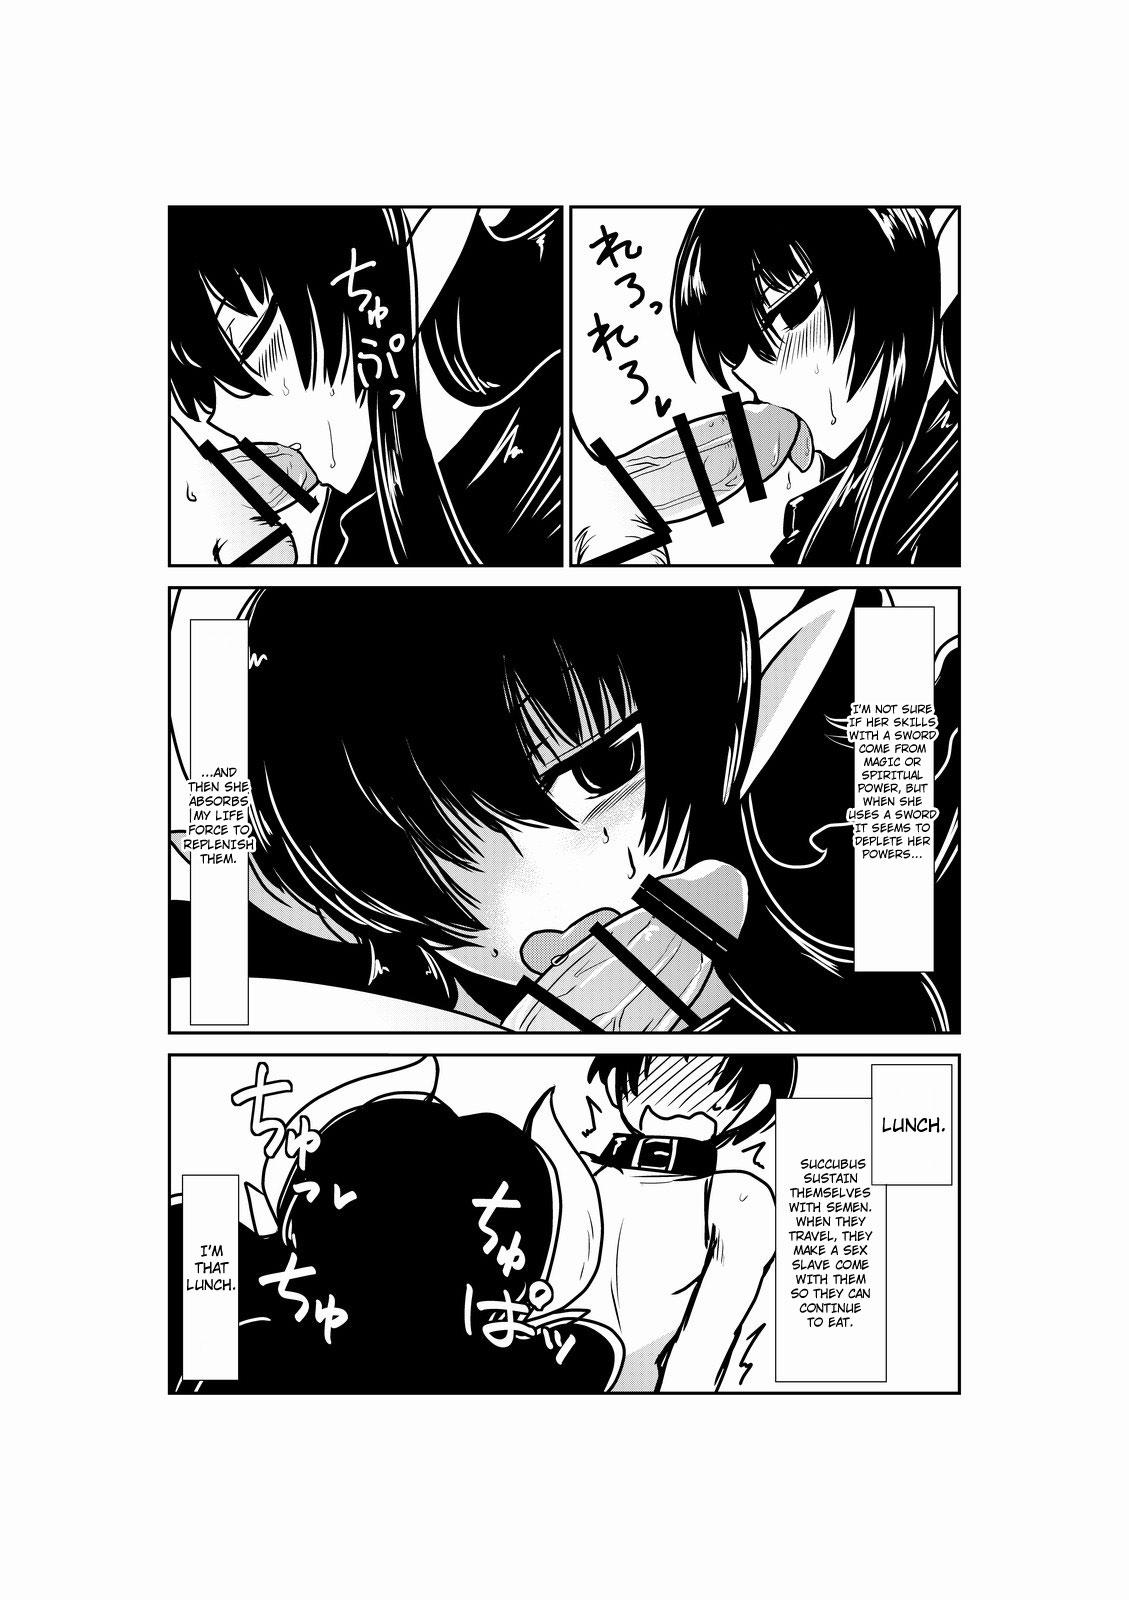 Small Tits Porn Succubus Kenshi to Obentou. | Lunch with a Succubus Swordswoman. Lesbo - Page 4